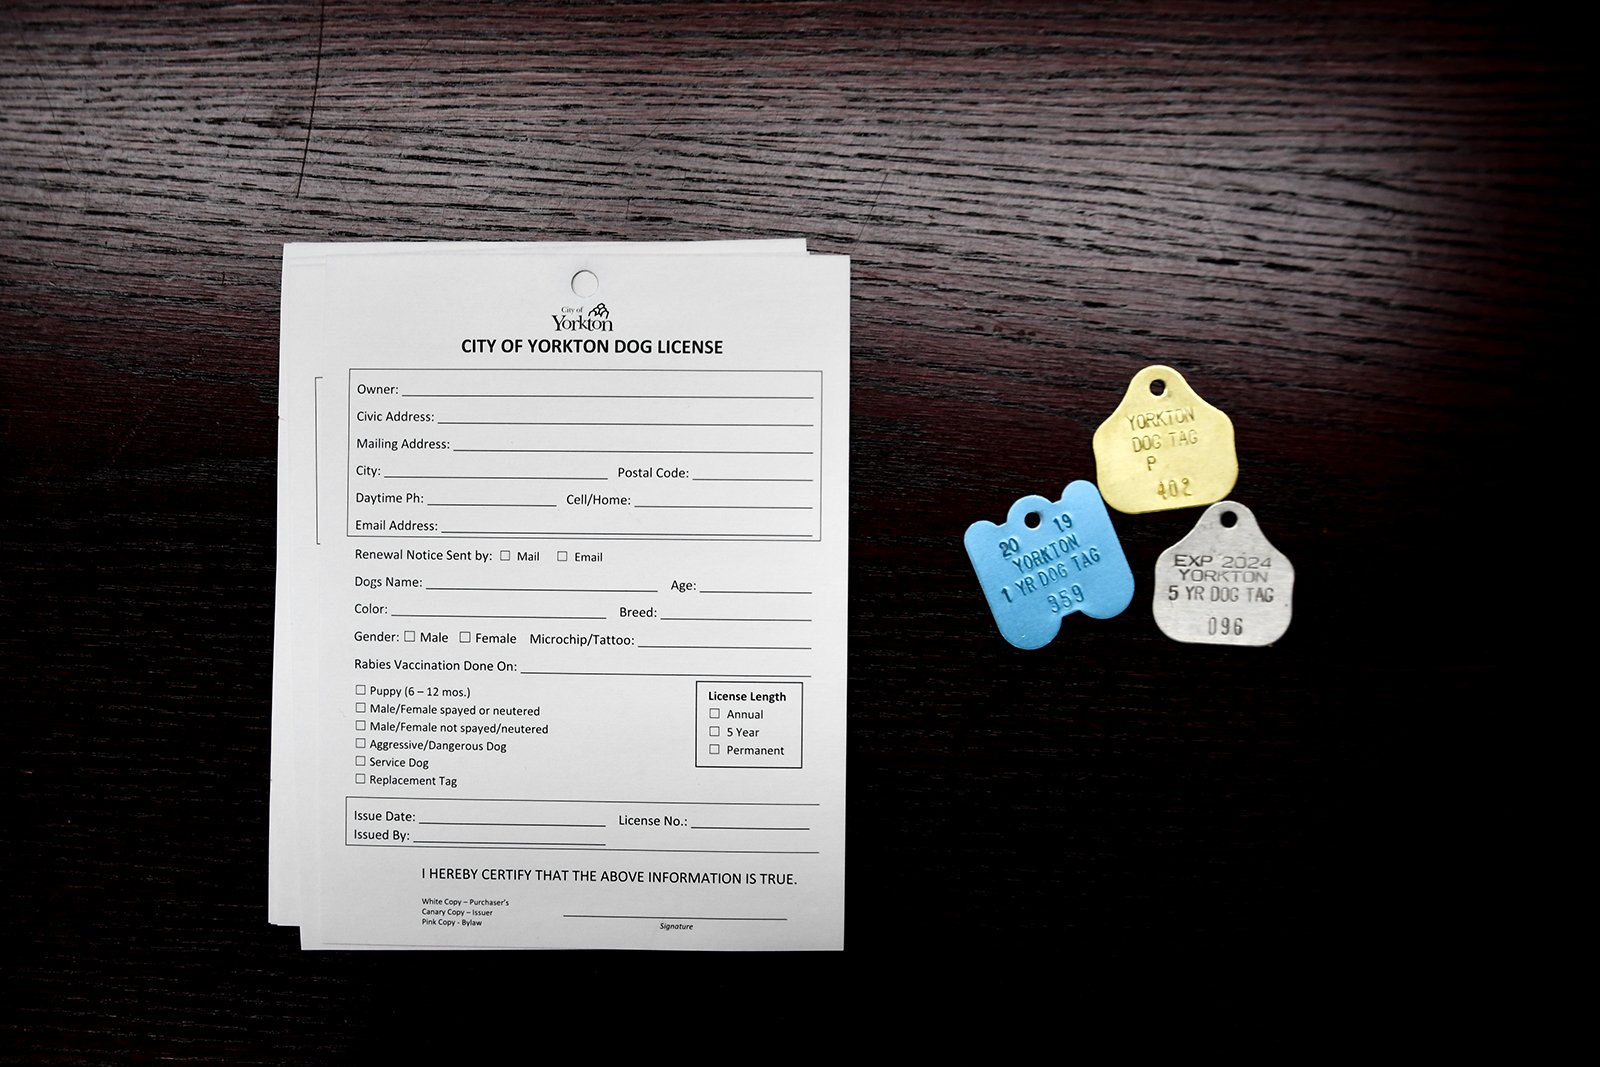 Dog tags and permit form